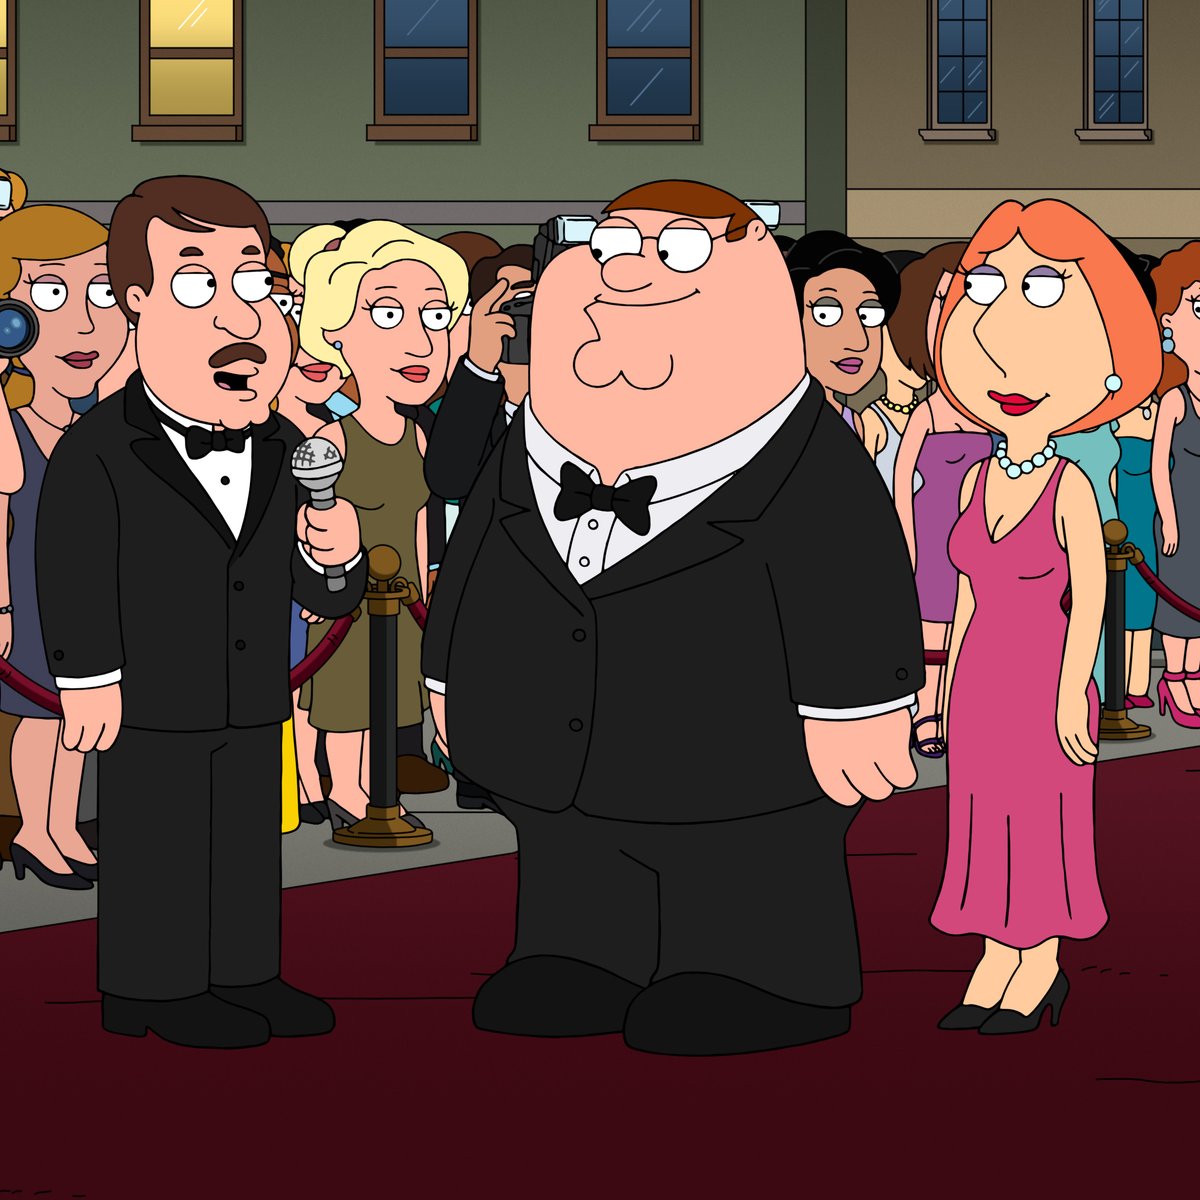 what questions do you have for the cast and producers of #familyguy? submit them here for a chance to be featured tomorrow during our 25th anniversary celebration at @paleycenter!